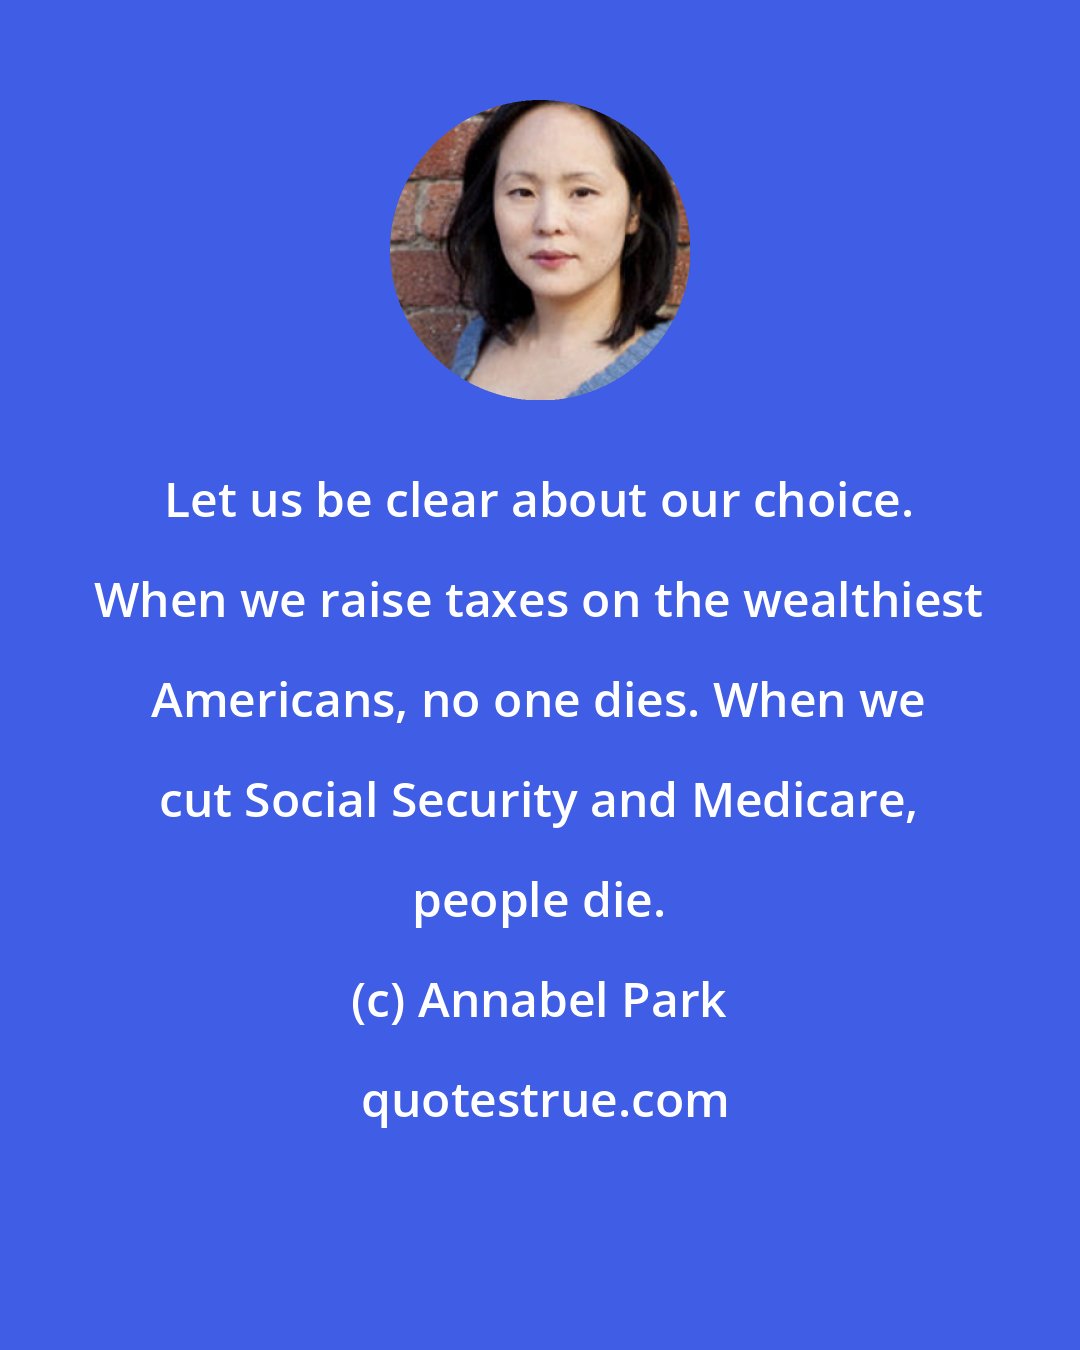 Annabel Park: Let us be clear about our choice. When we raise taxes on the wealthiest Americans, no one dies. When we cut Social Security and Medicare, people die.